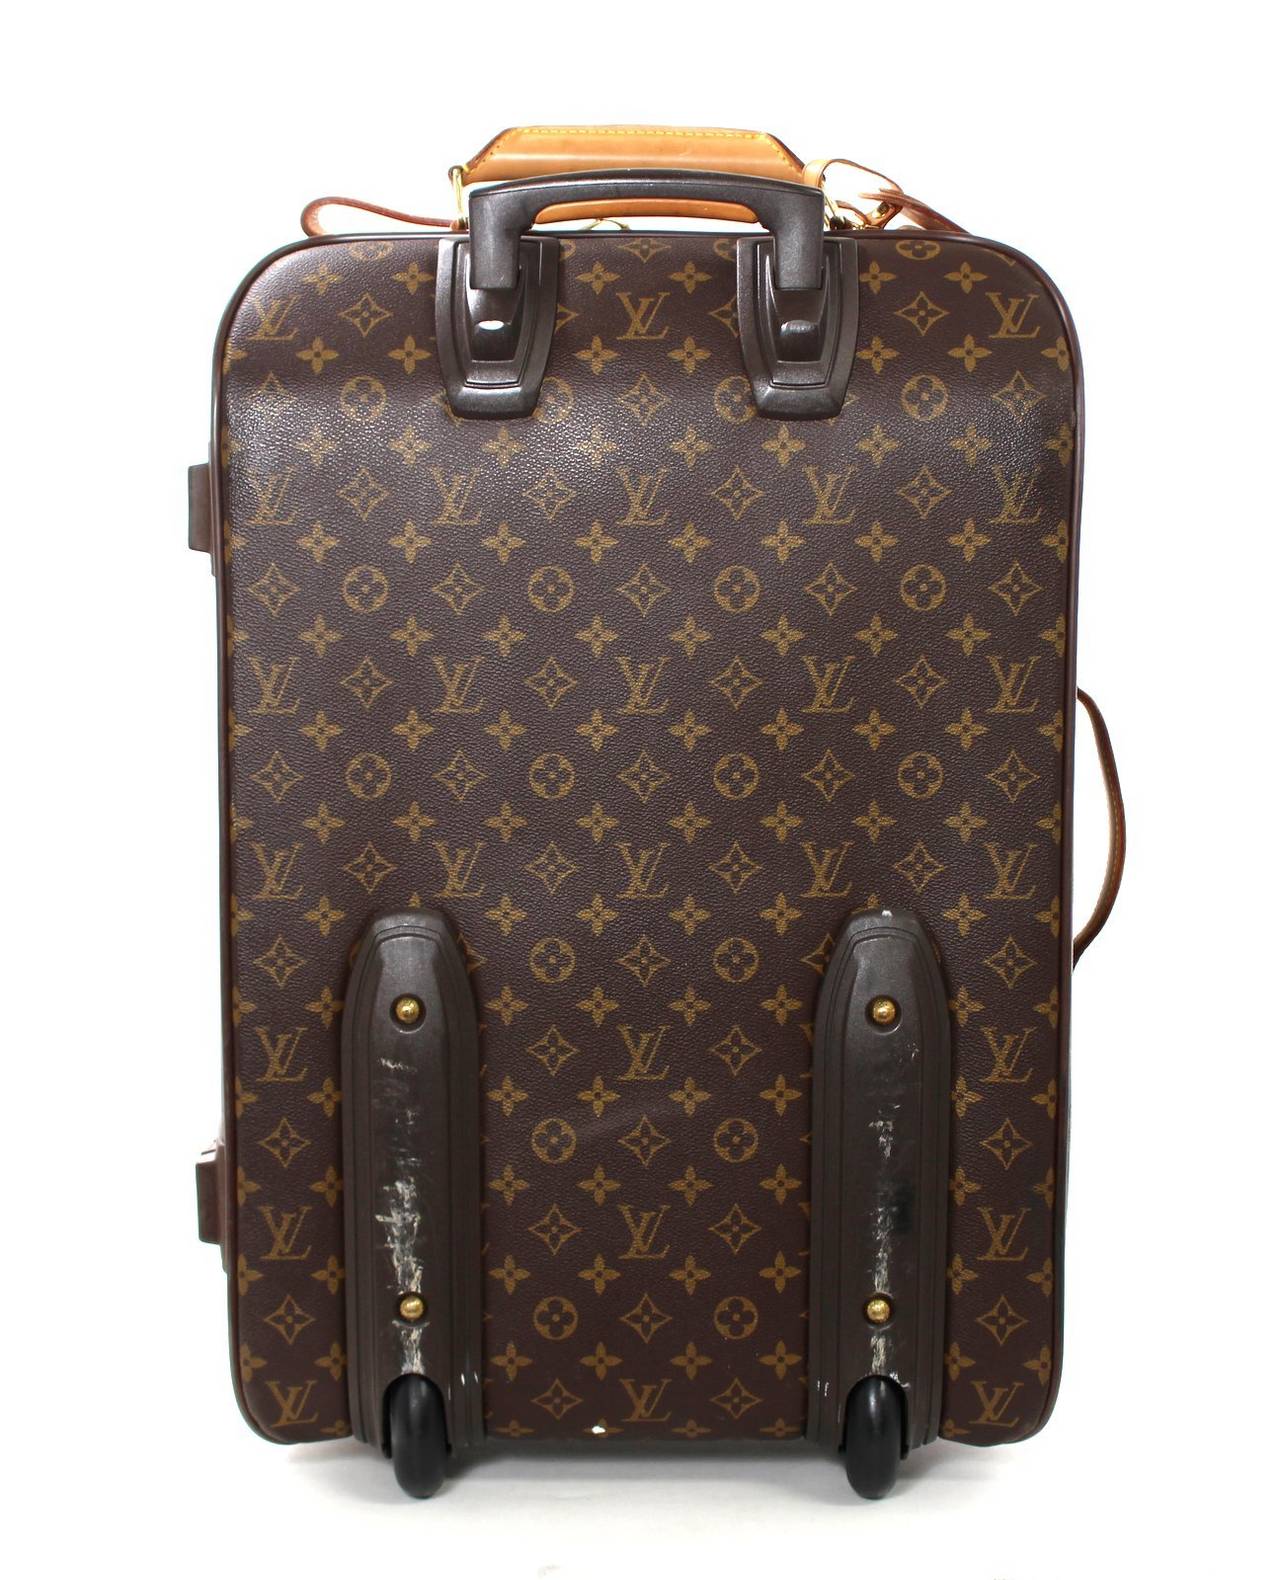 Louis Vuitton Monogram Canvas Rolling Travel 55 Luggage- VERY GOOD  to EXCELLENT condition

Signs of normal light use. The current Pegase 55 is very similar to this retired version.  It is the medium size rolling trolley in the 55 size which